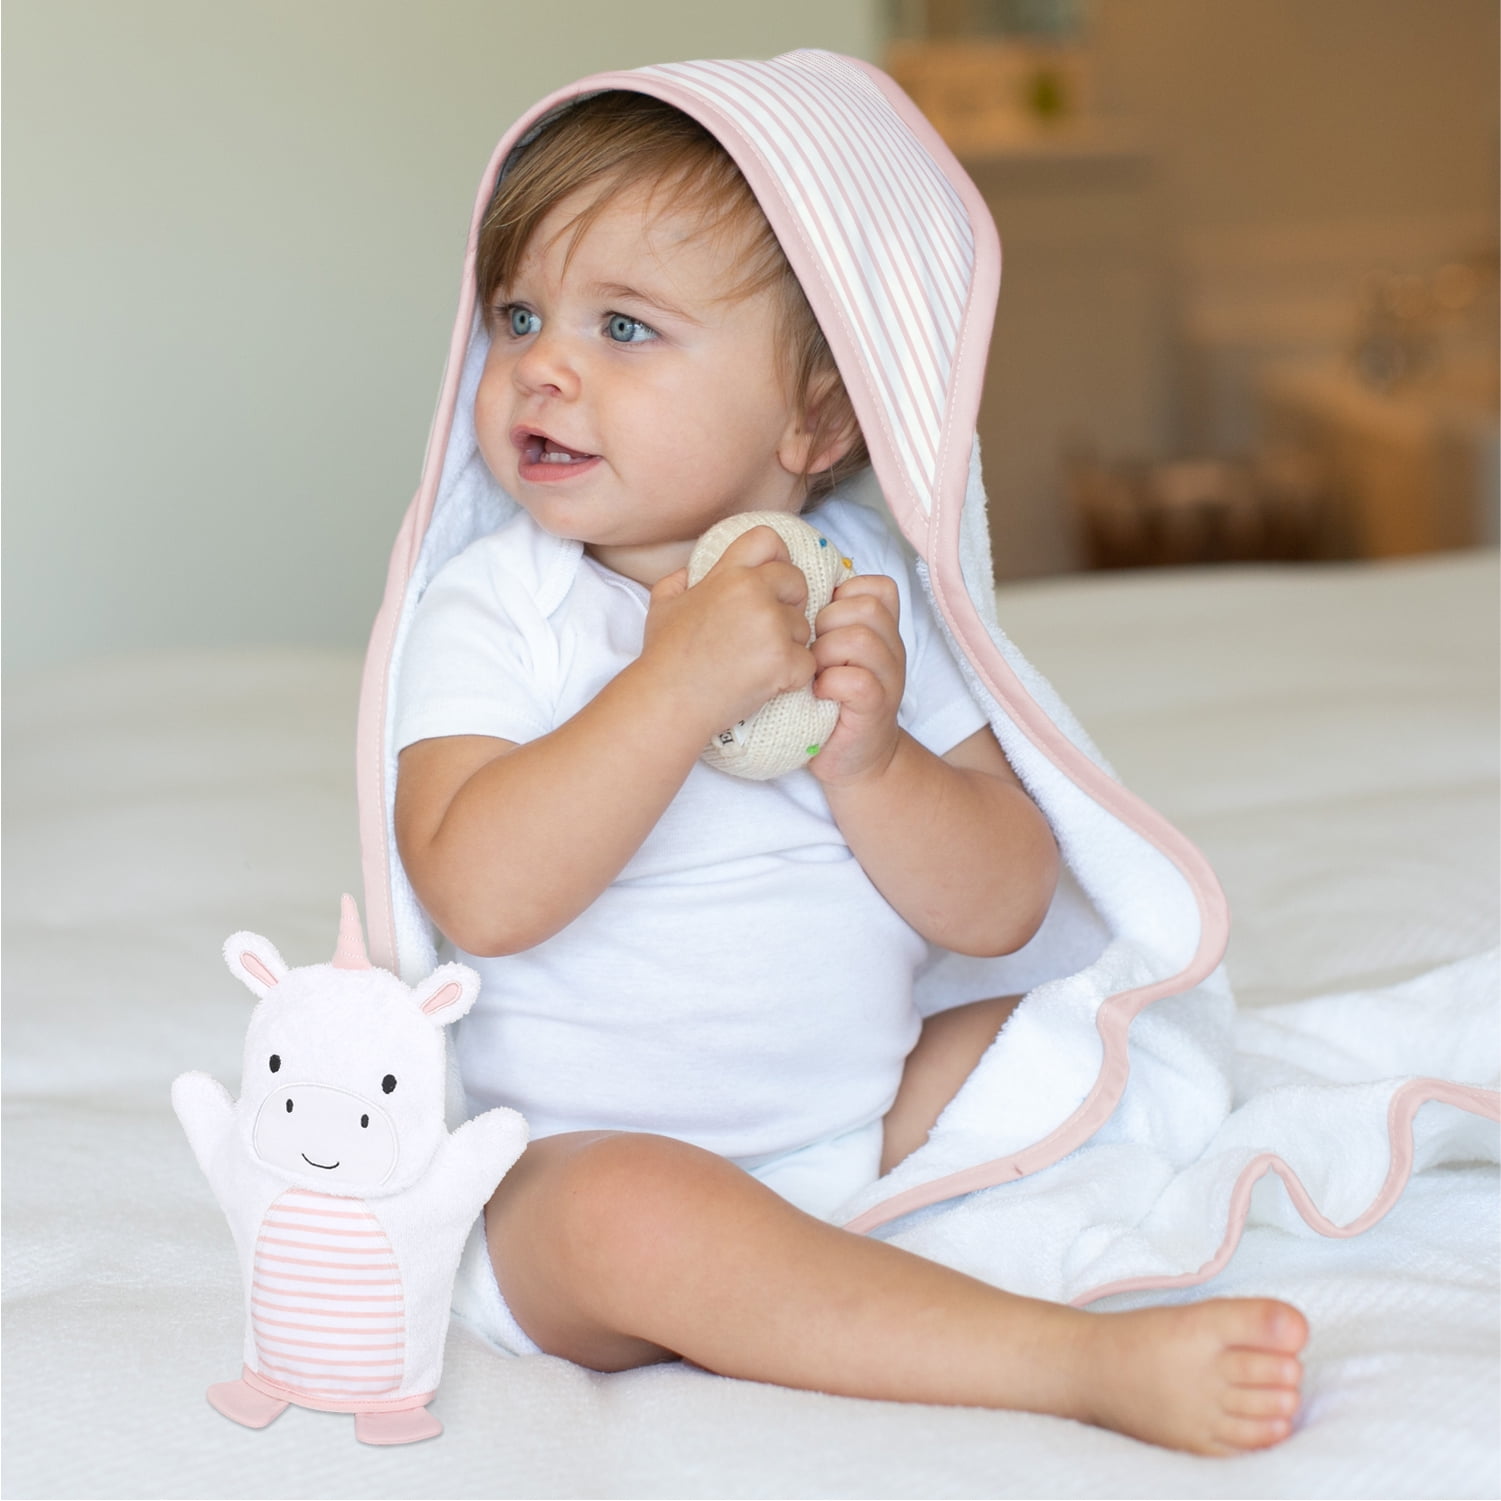 Cat Hooded Baby Towel & Set of 5 Wash Cloths ~ Snuggle Baby Girl Shower Gift 